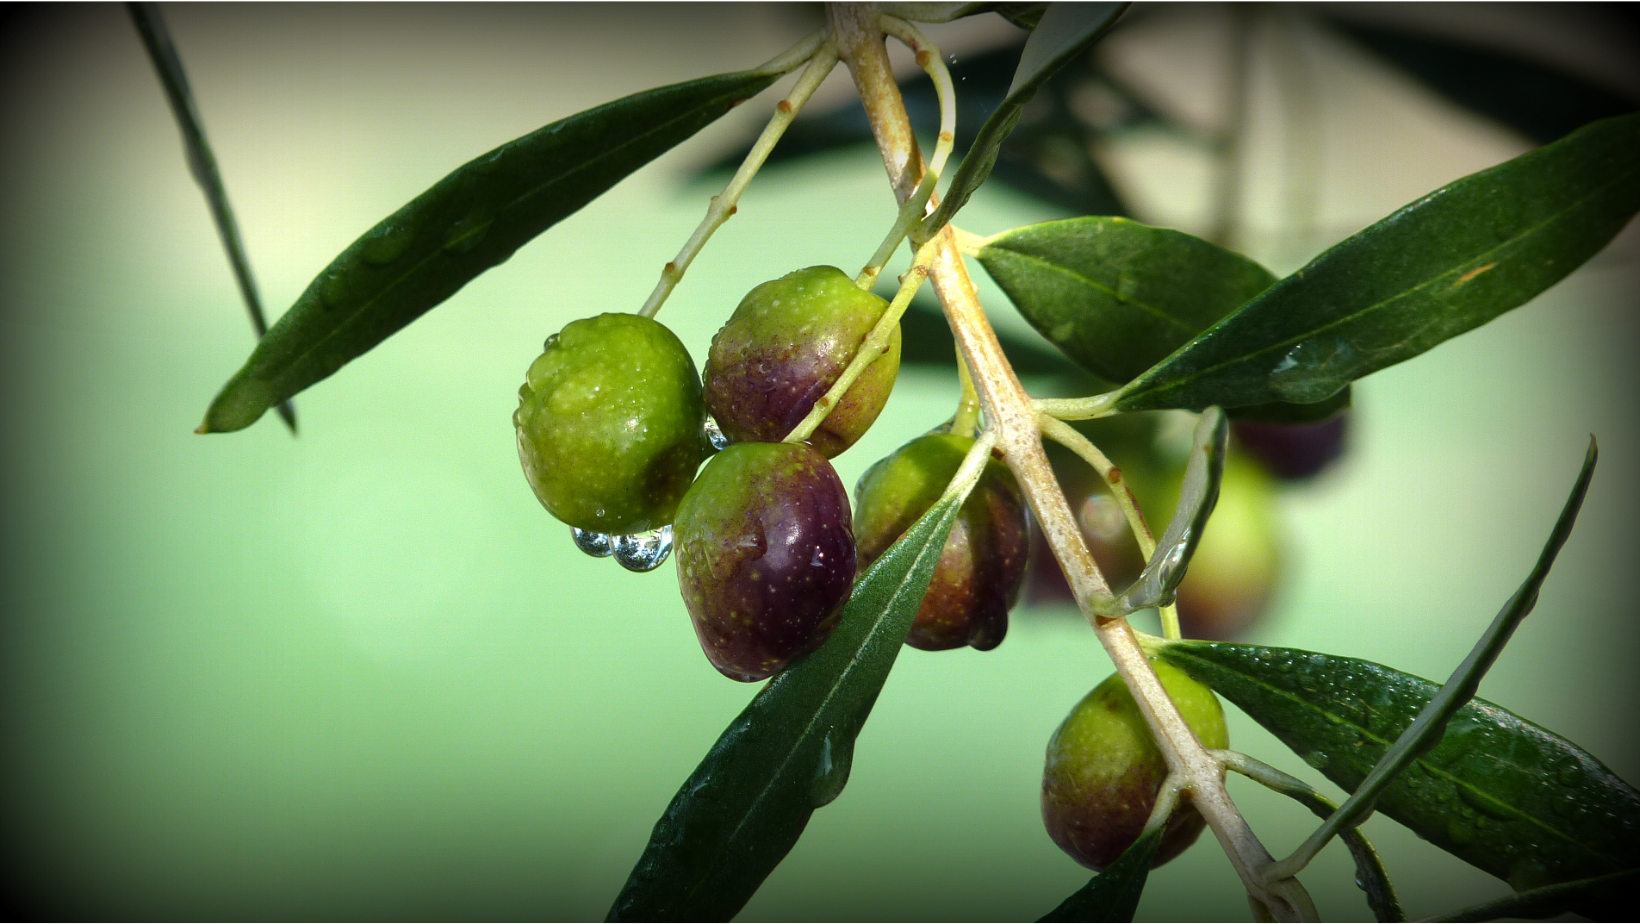 Ripening olives hanging on a branch with green leaves.